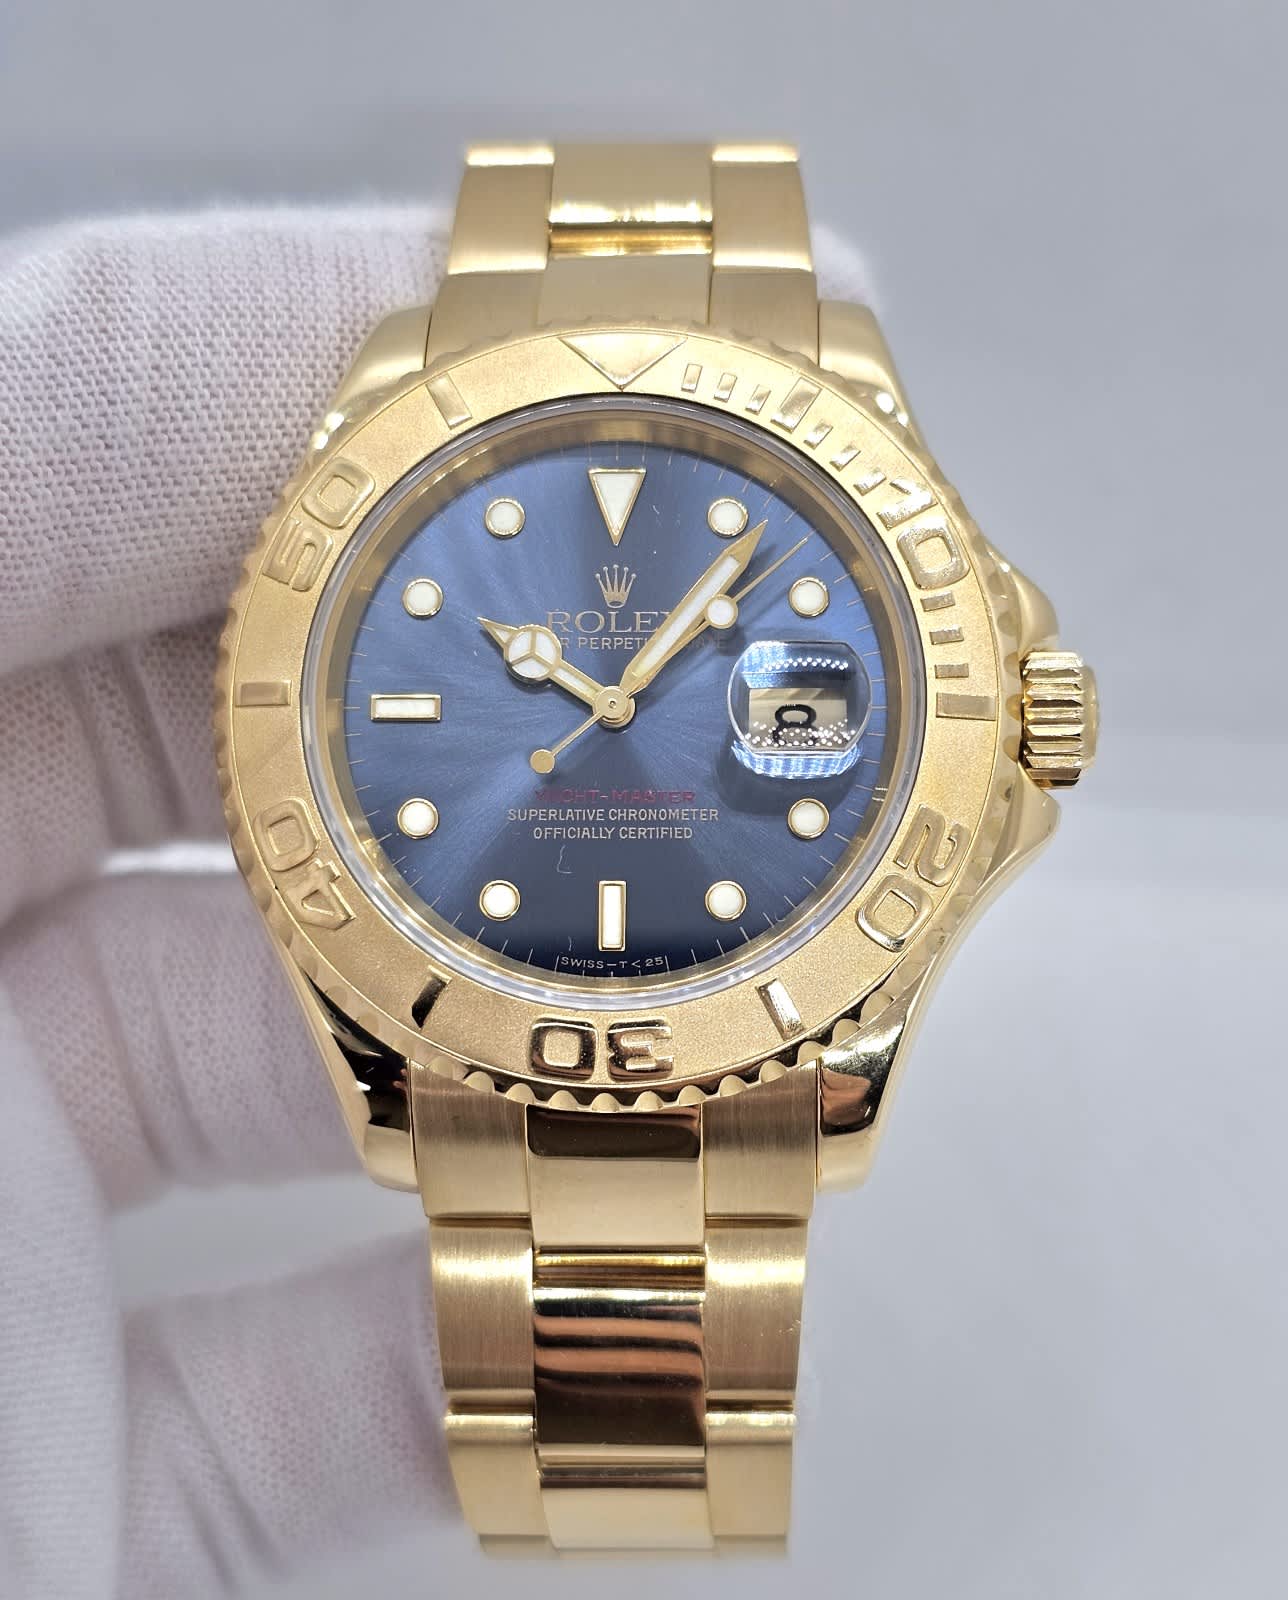 Rolex Yacht-Master II 18k YG White Dial Blue Ceramic 44mm Watch 116688 -  Jewels in Time